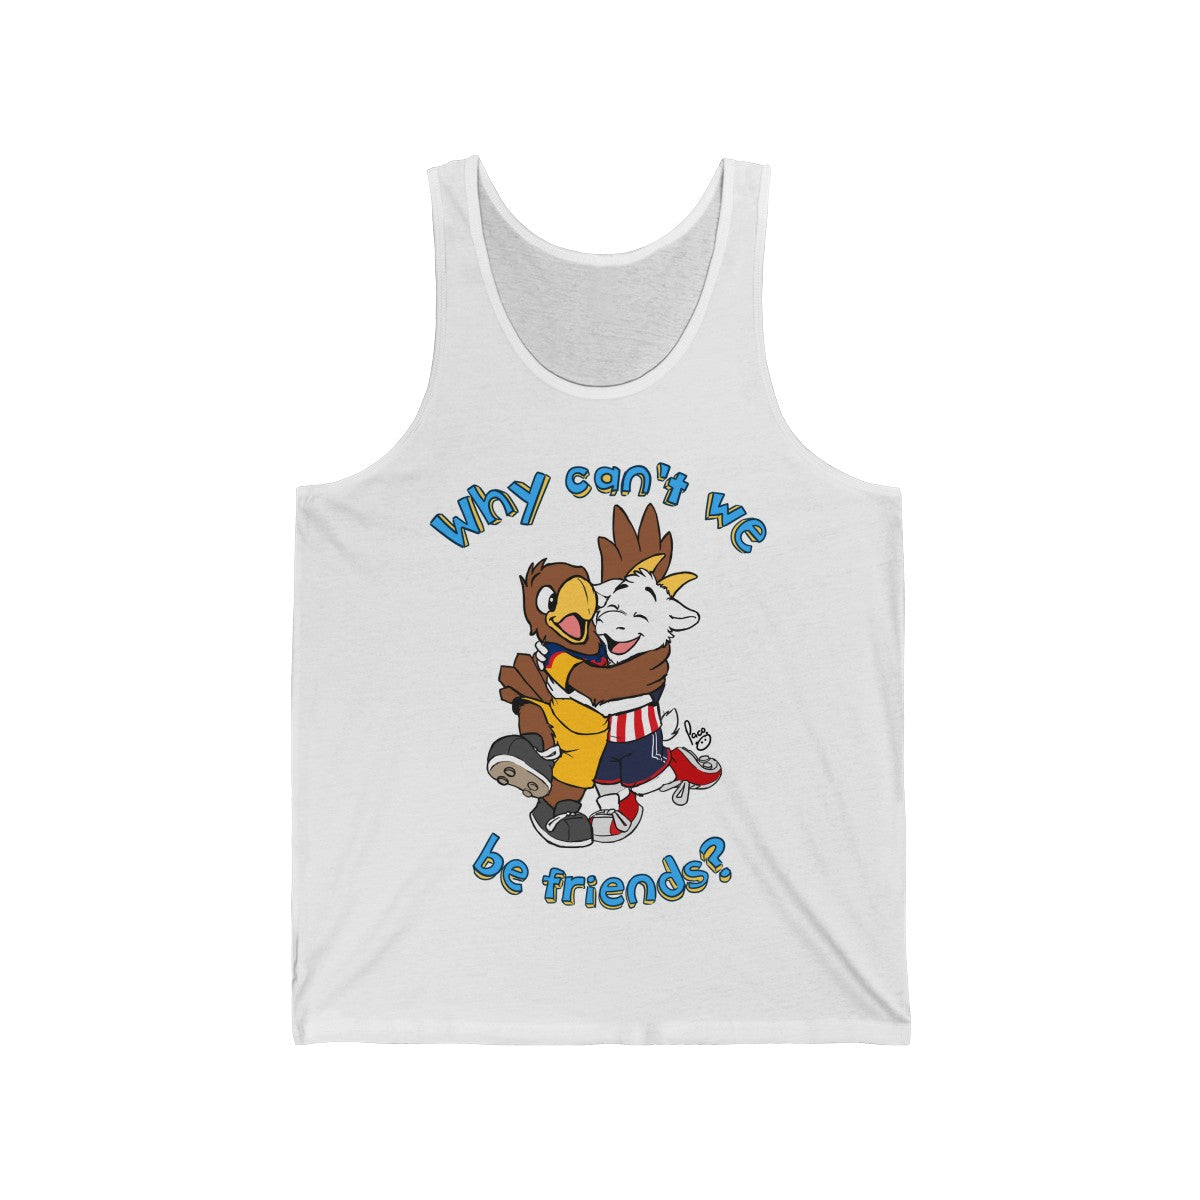 Why Can't we be Friends? - Tank Top Tank Top Paco Panda White XS 